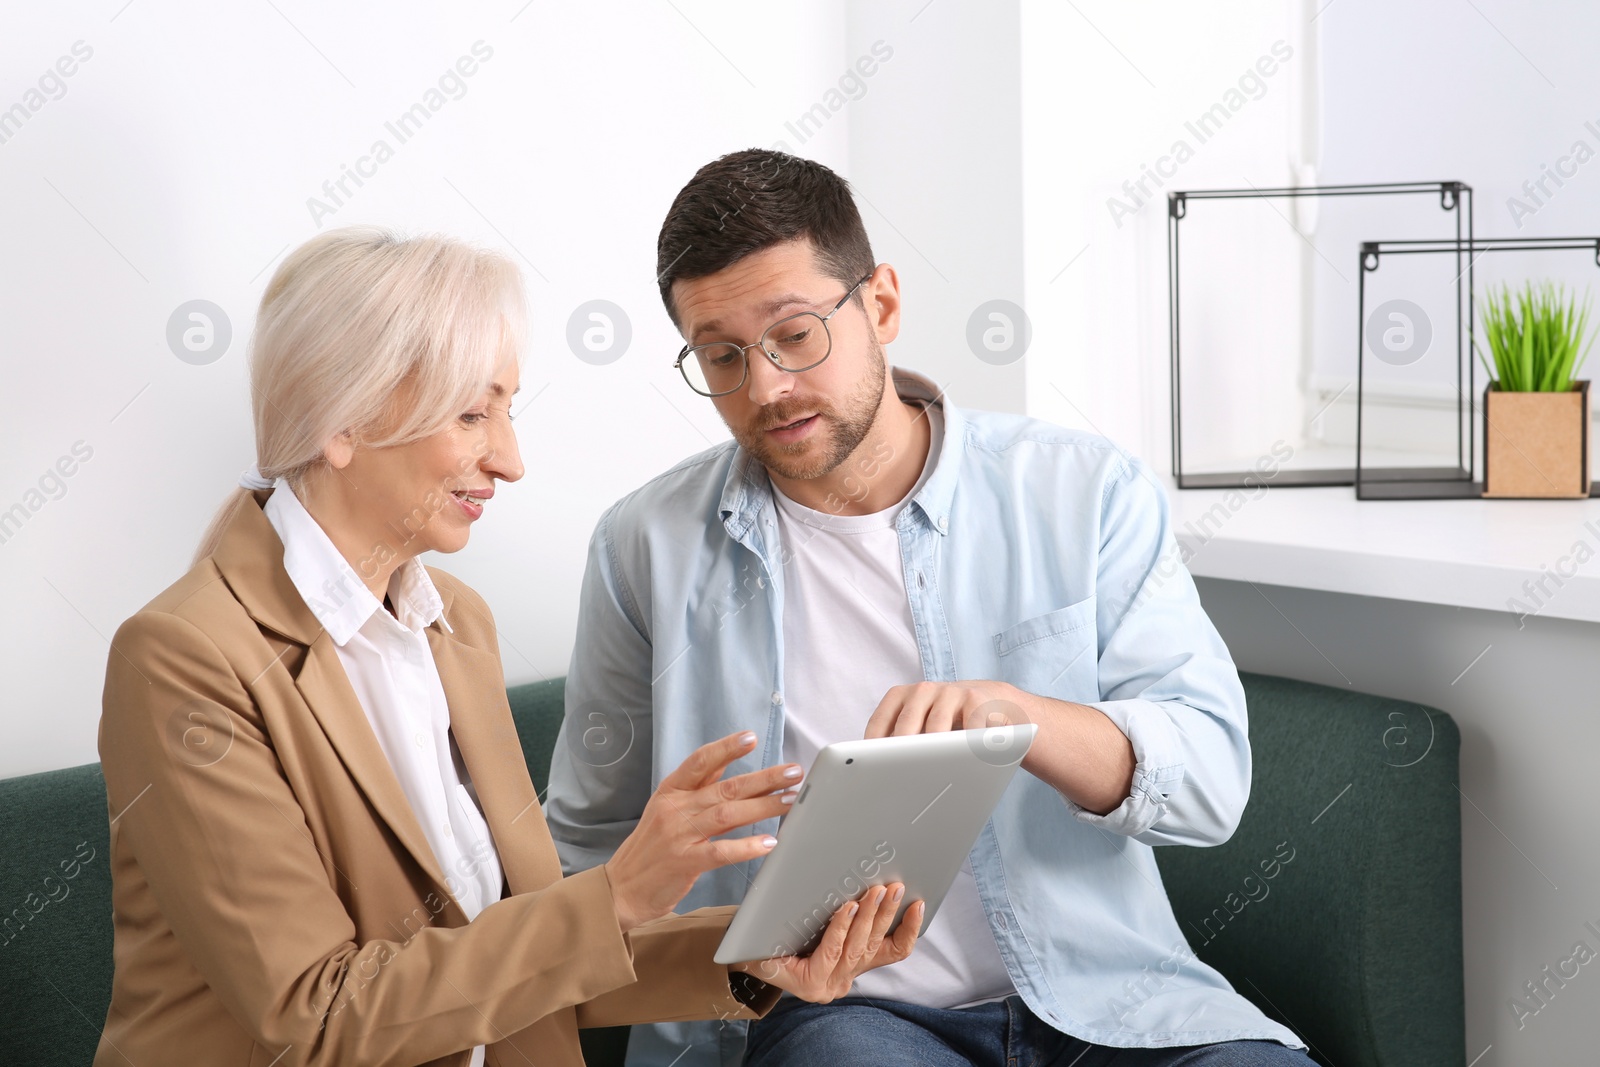 Photo of Happy boss with tablet and employee discussing work issues on sofa in office